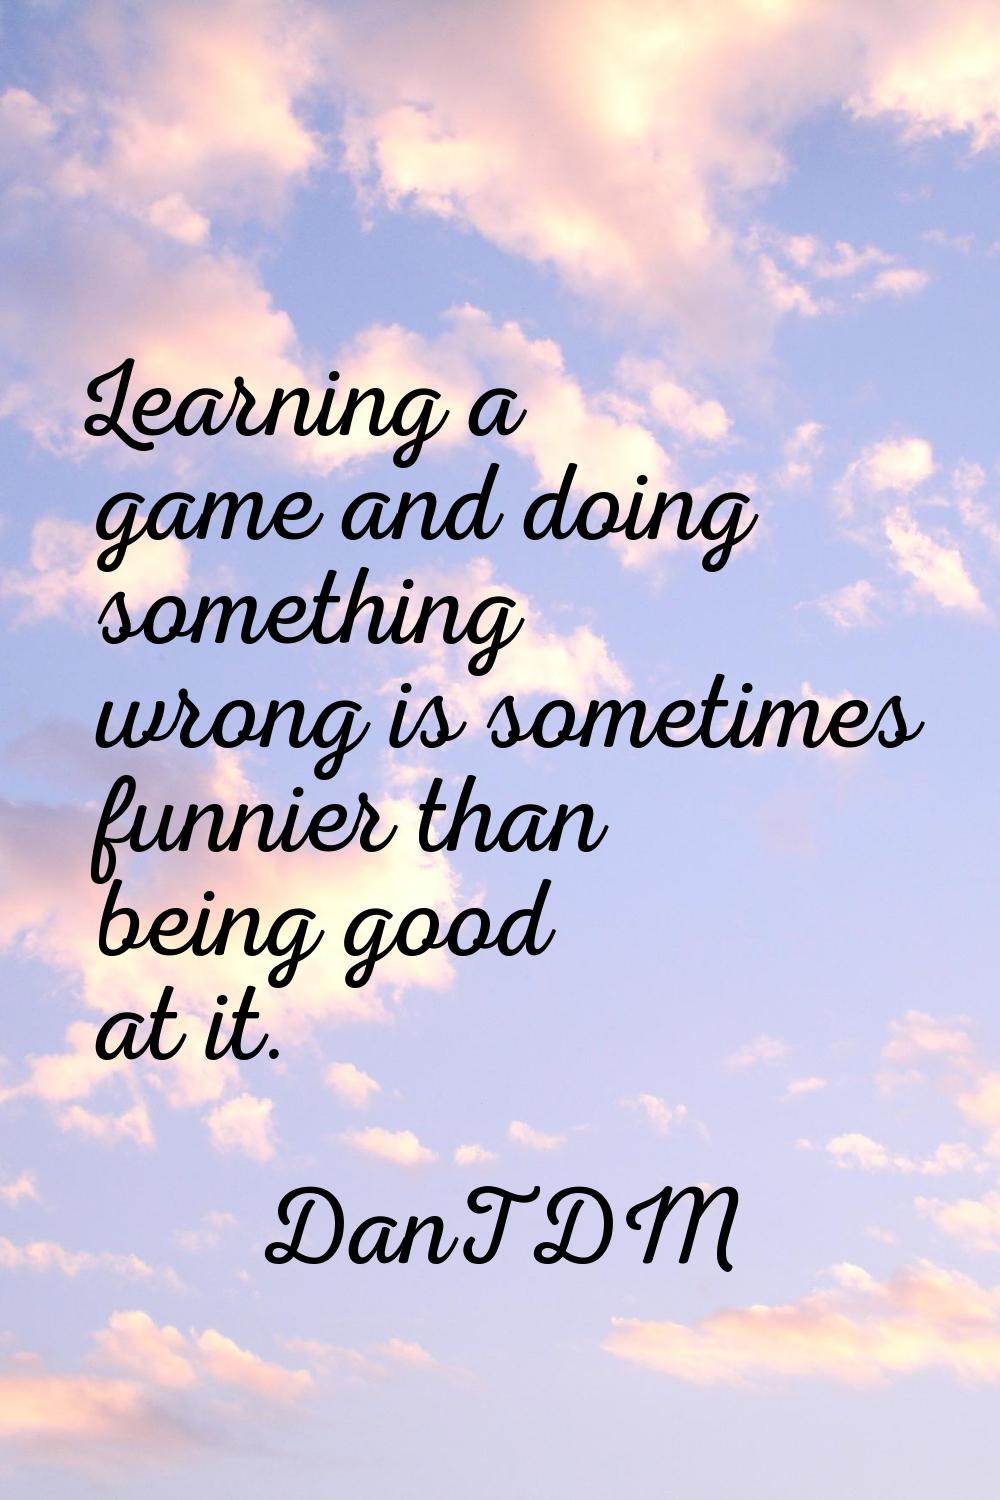 Learning a game and doing something wrong is sometimes funnier than being good at it.